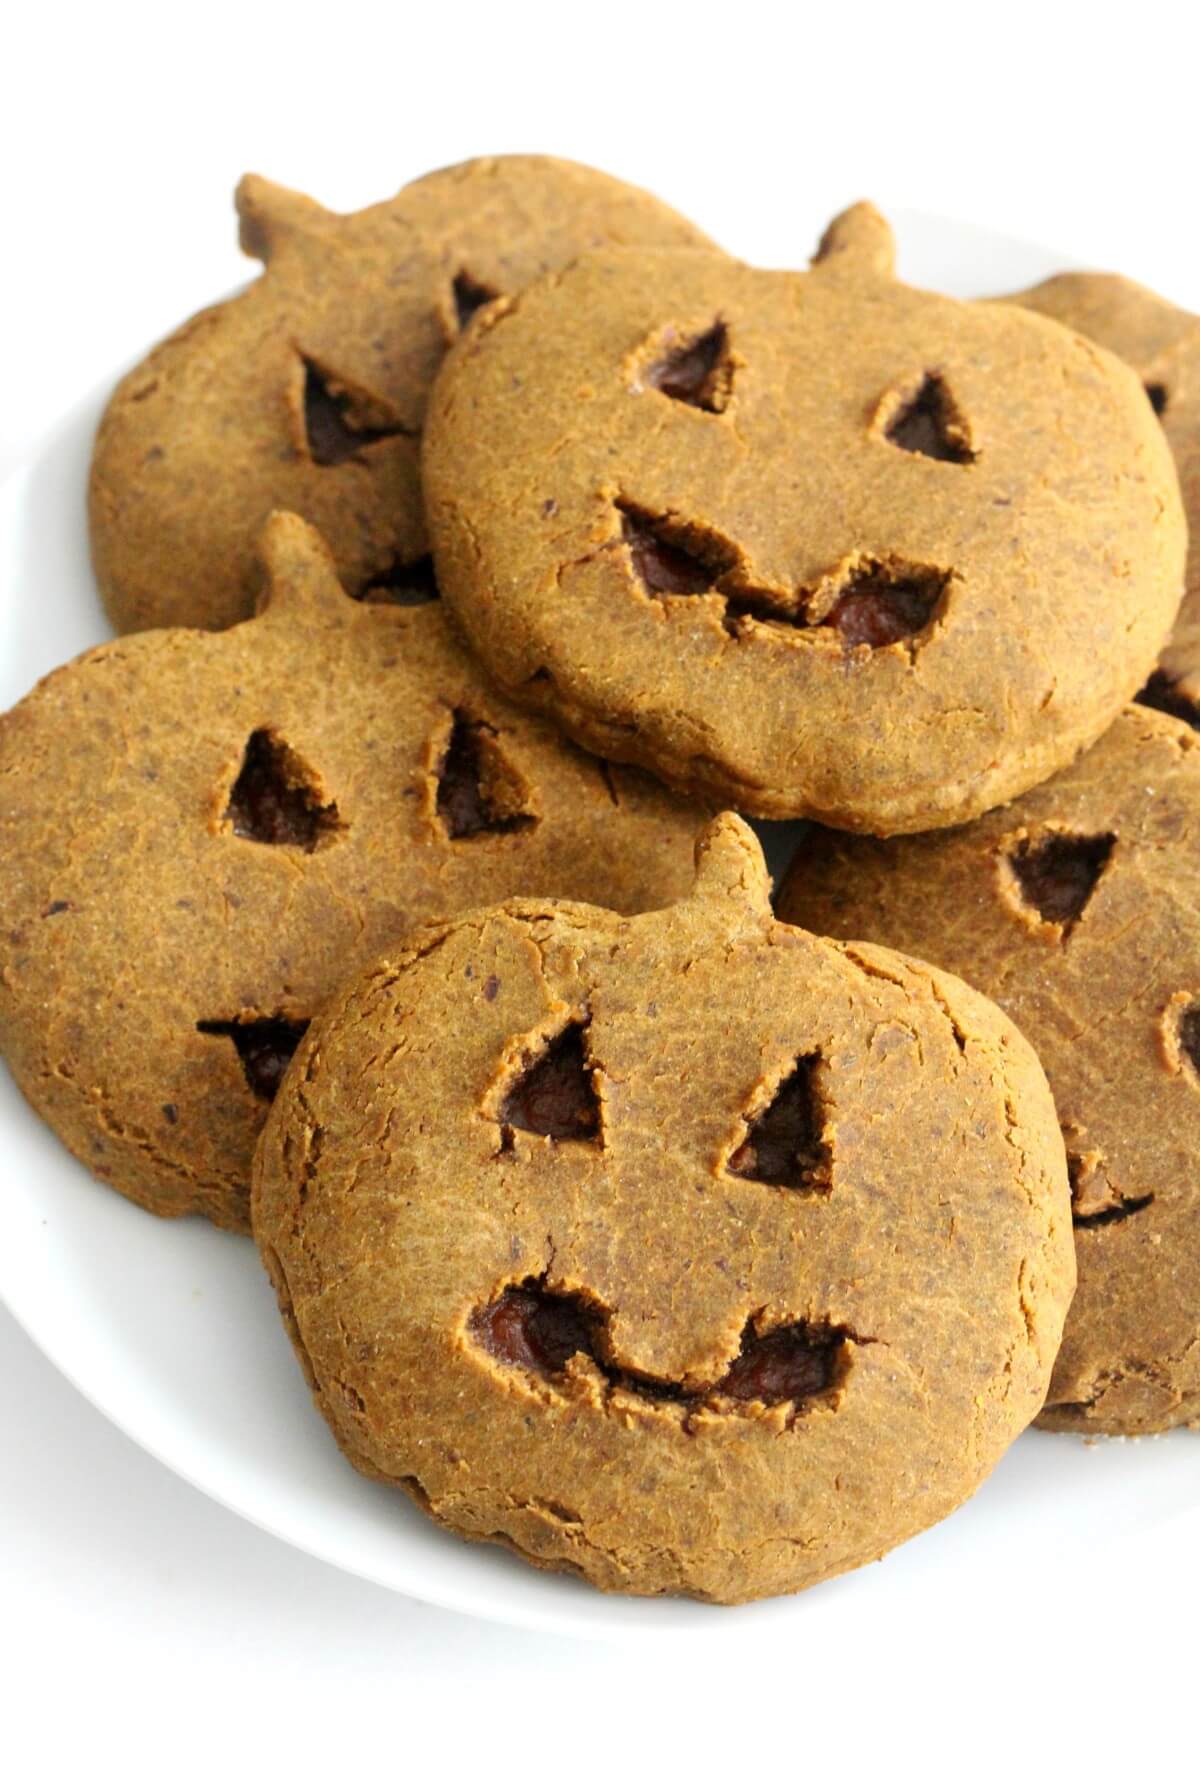 Homemade little debbie pumpkin delights cookies in pile on white plate.